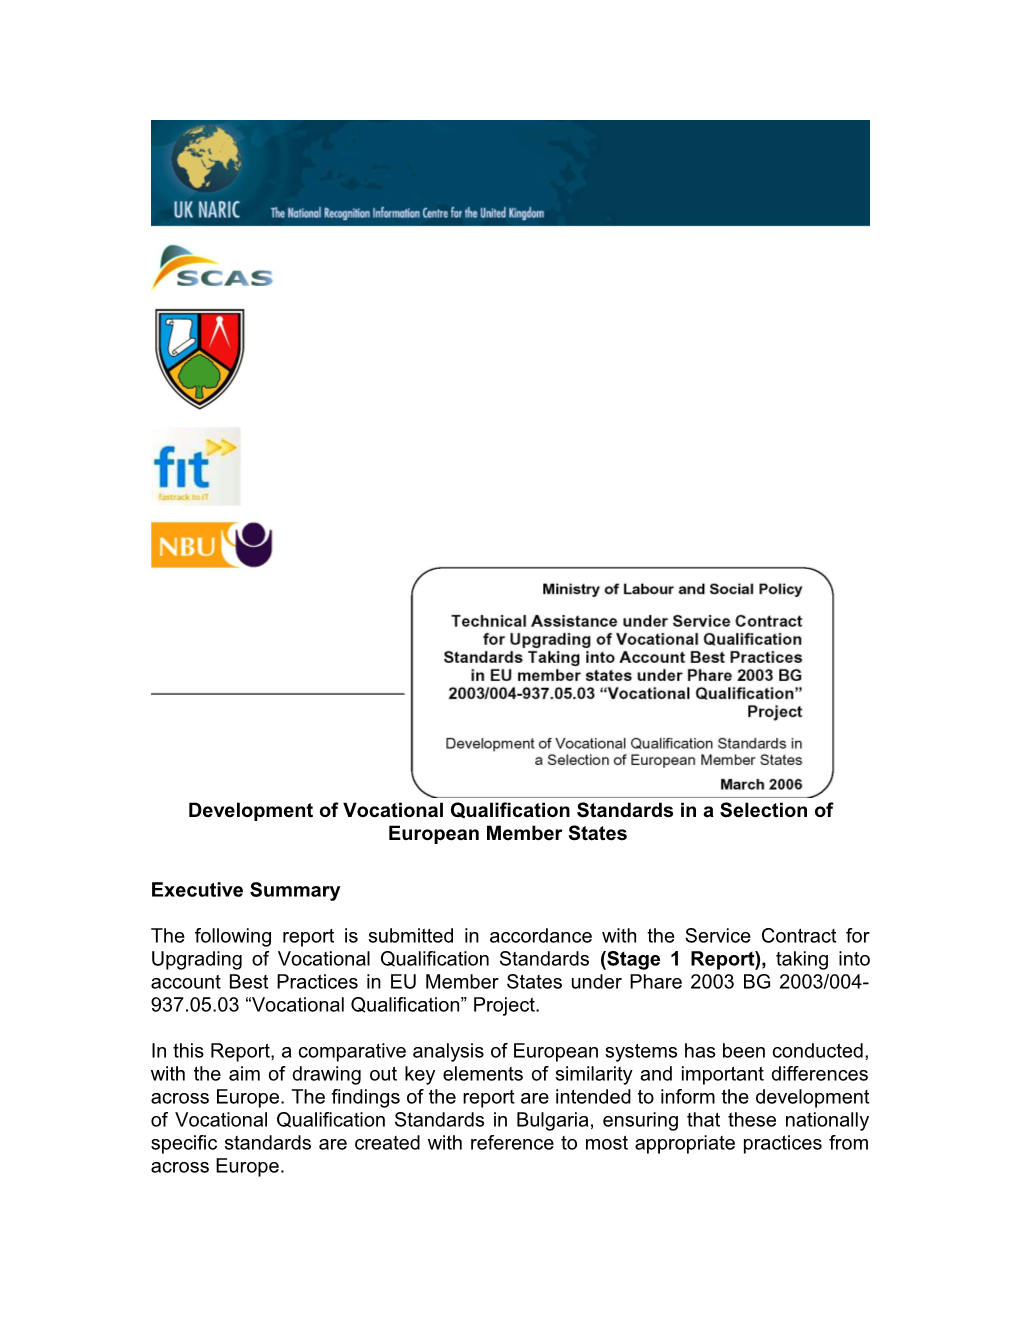 Development of Vocational Qualification Standards in a Selection of European Member States